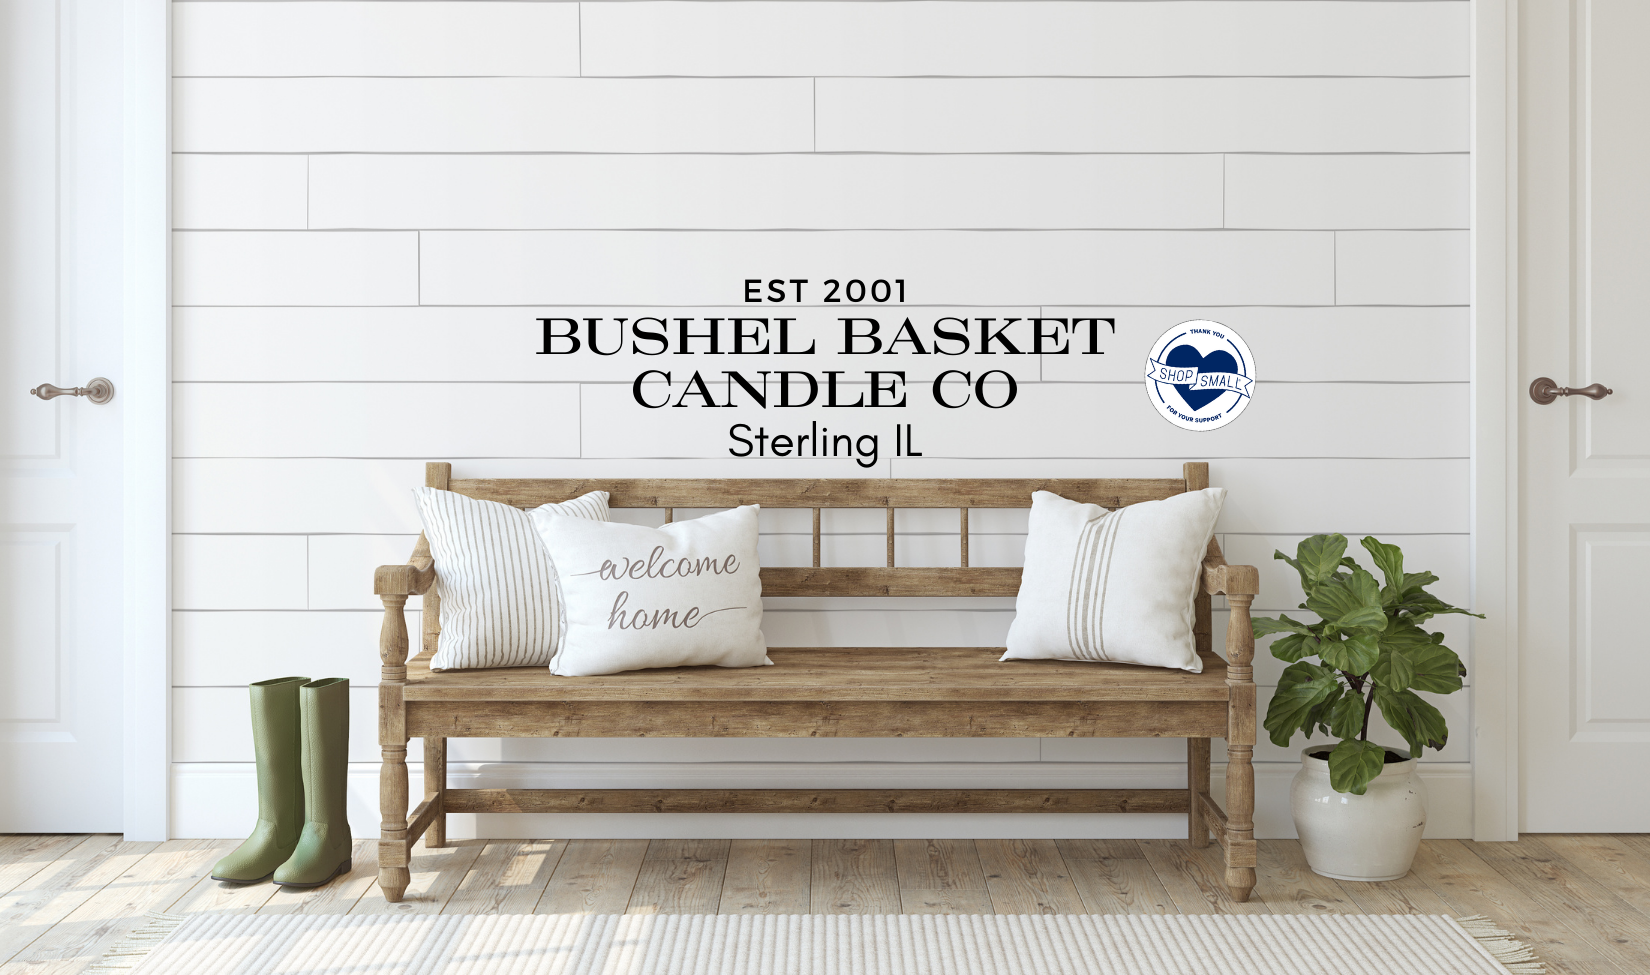 Wood bench under the Bushel Basket Candle Co lettering, displaying farmhouse and country decor